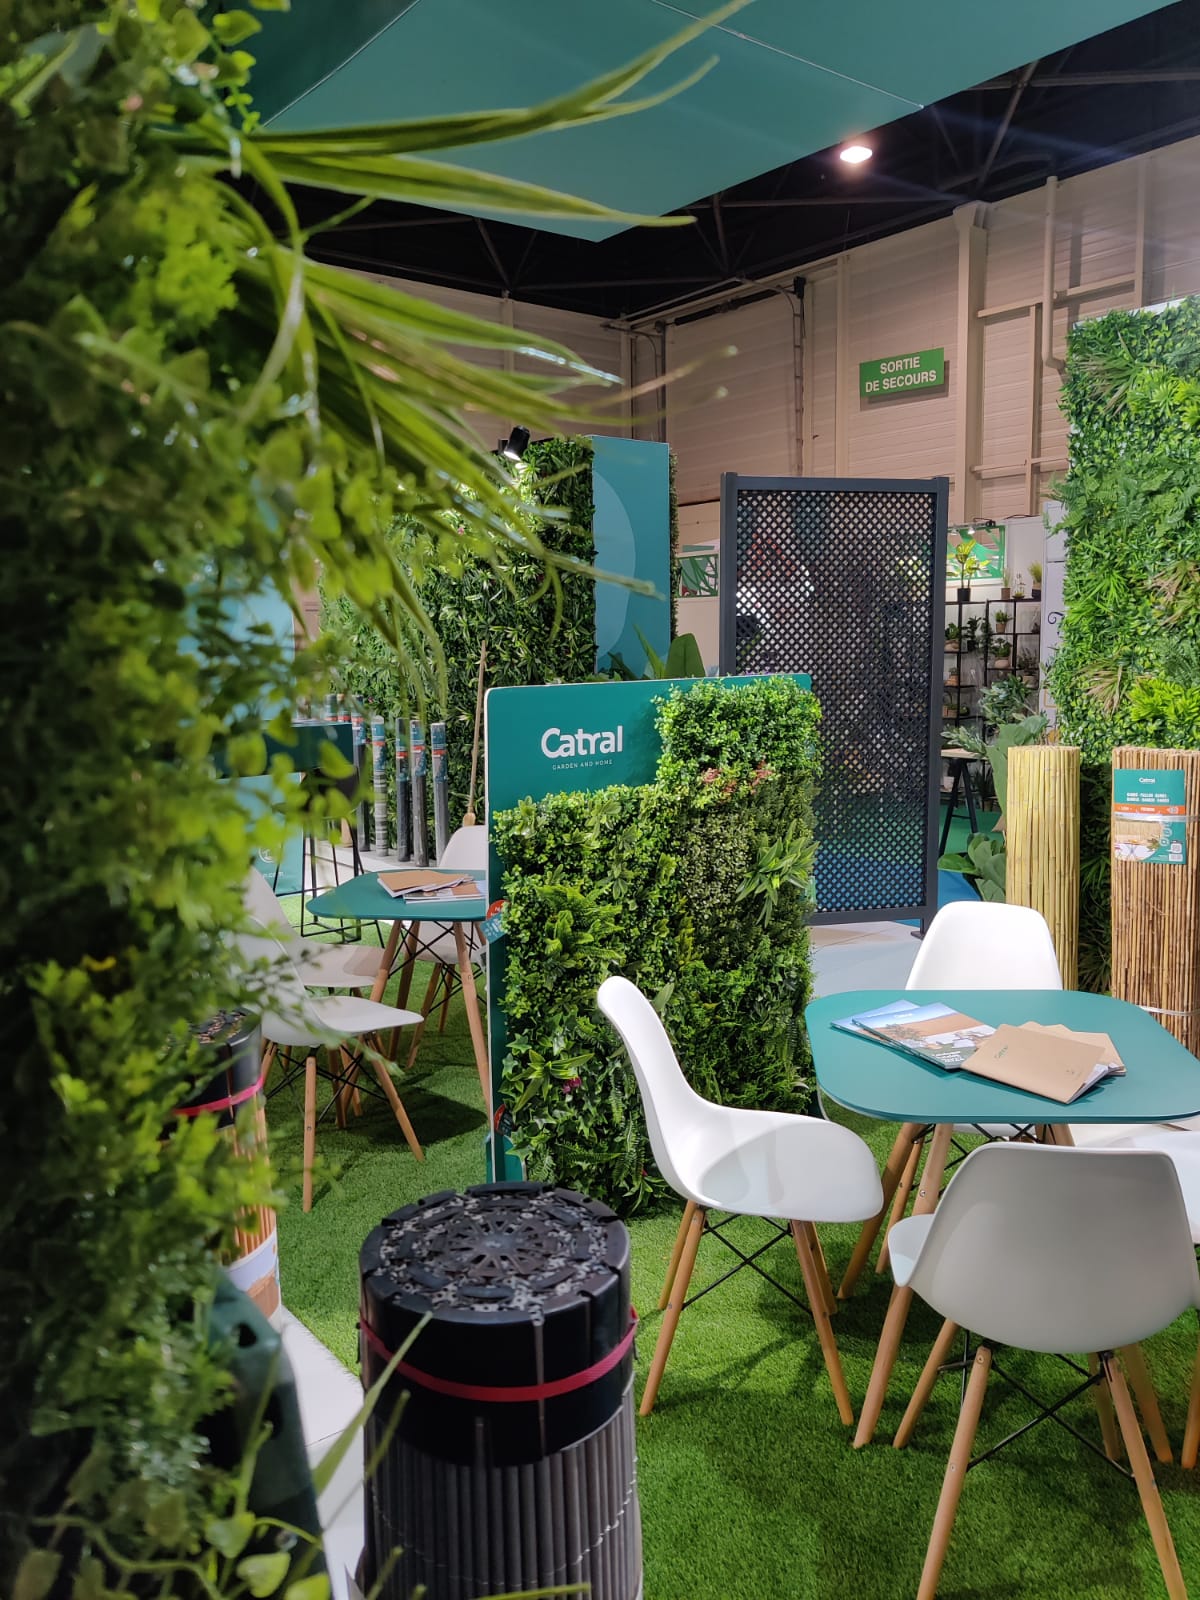 Catral Garden exhibits its new products at JDC Garden Trends 2022 1